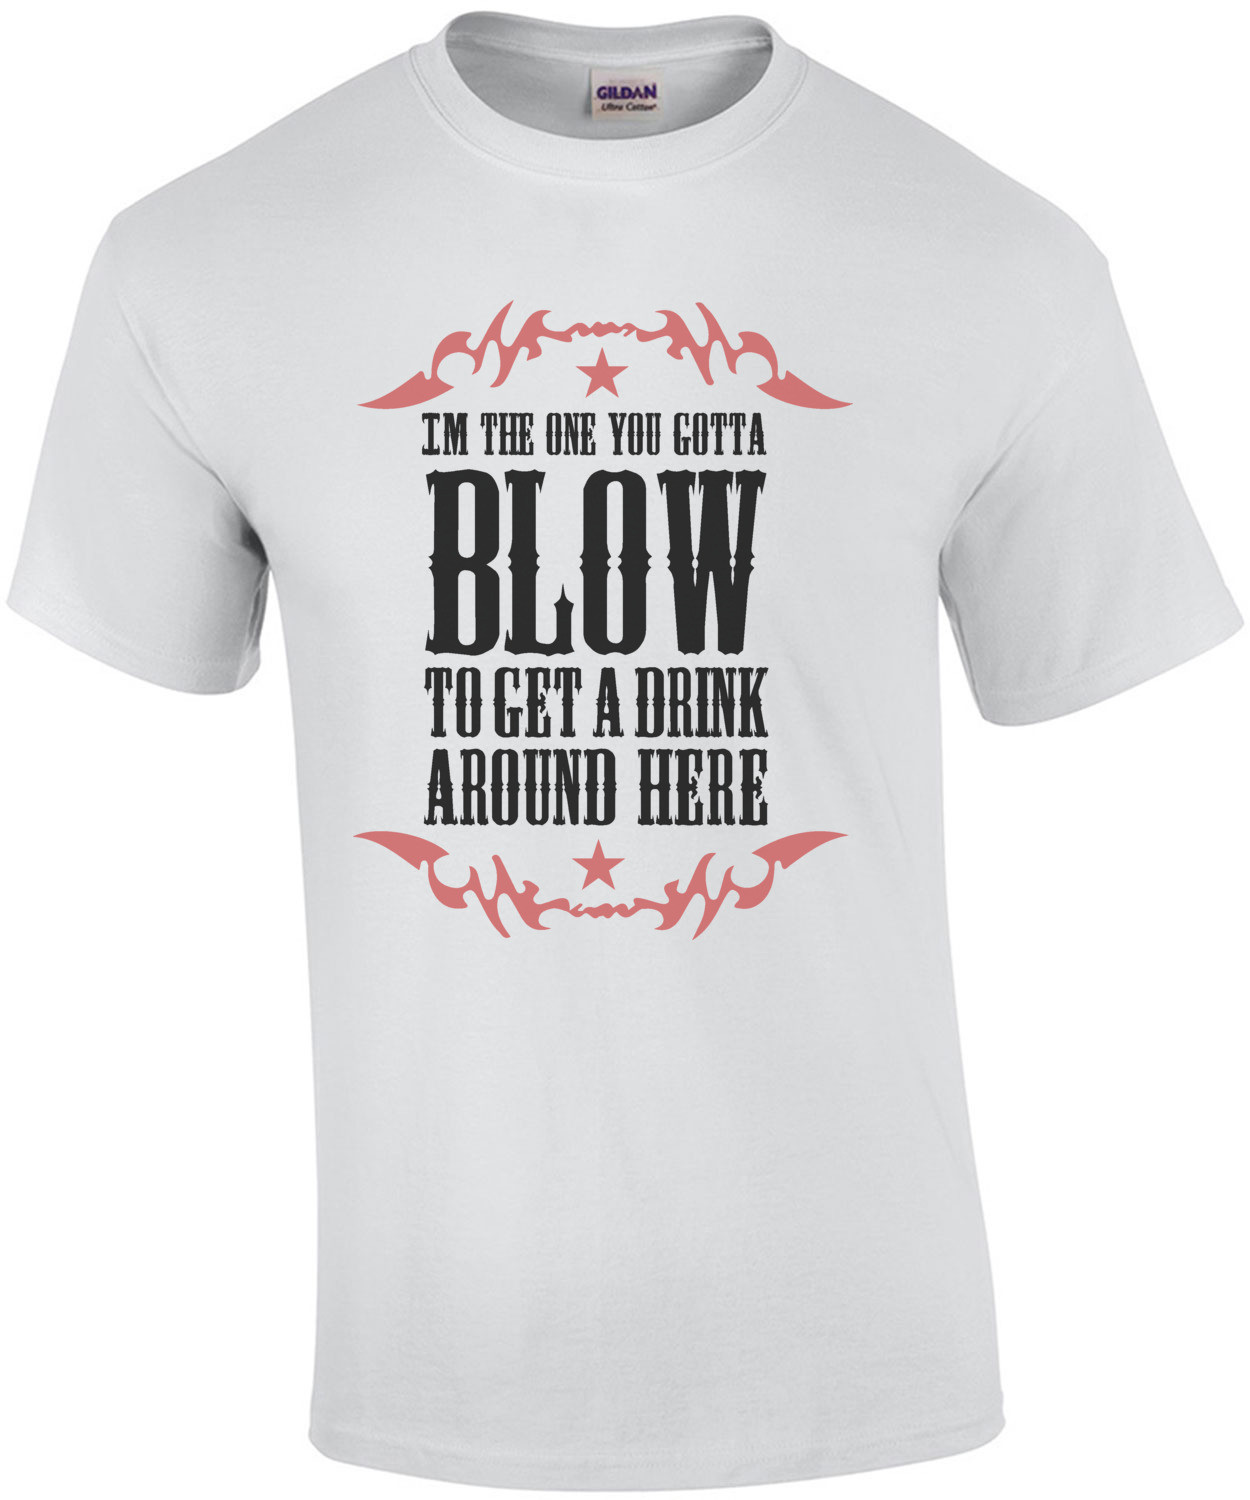 I'm the one you gotta blow to get a drink around here - Funny T-Shirt